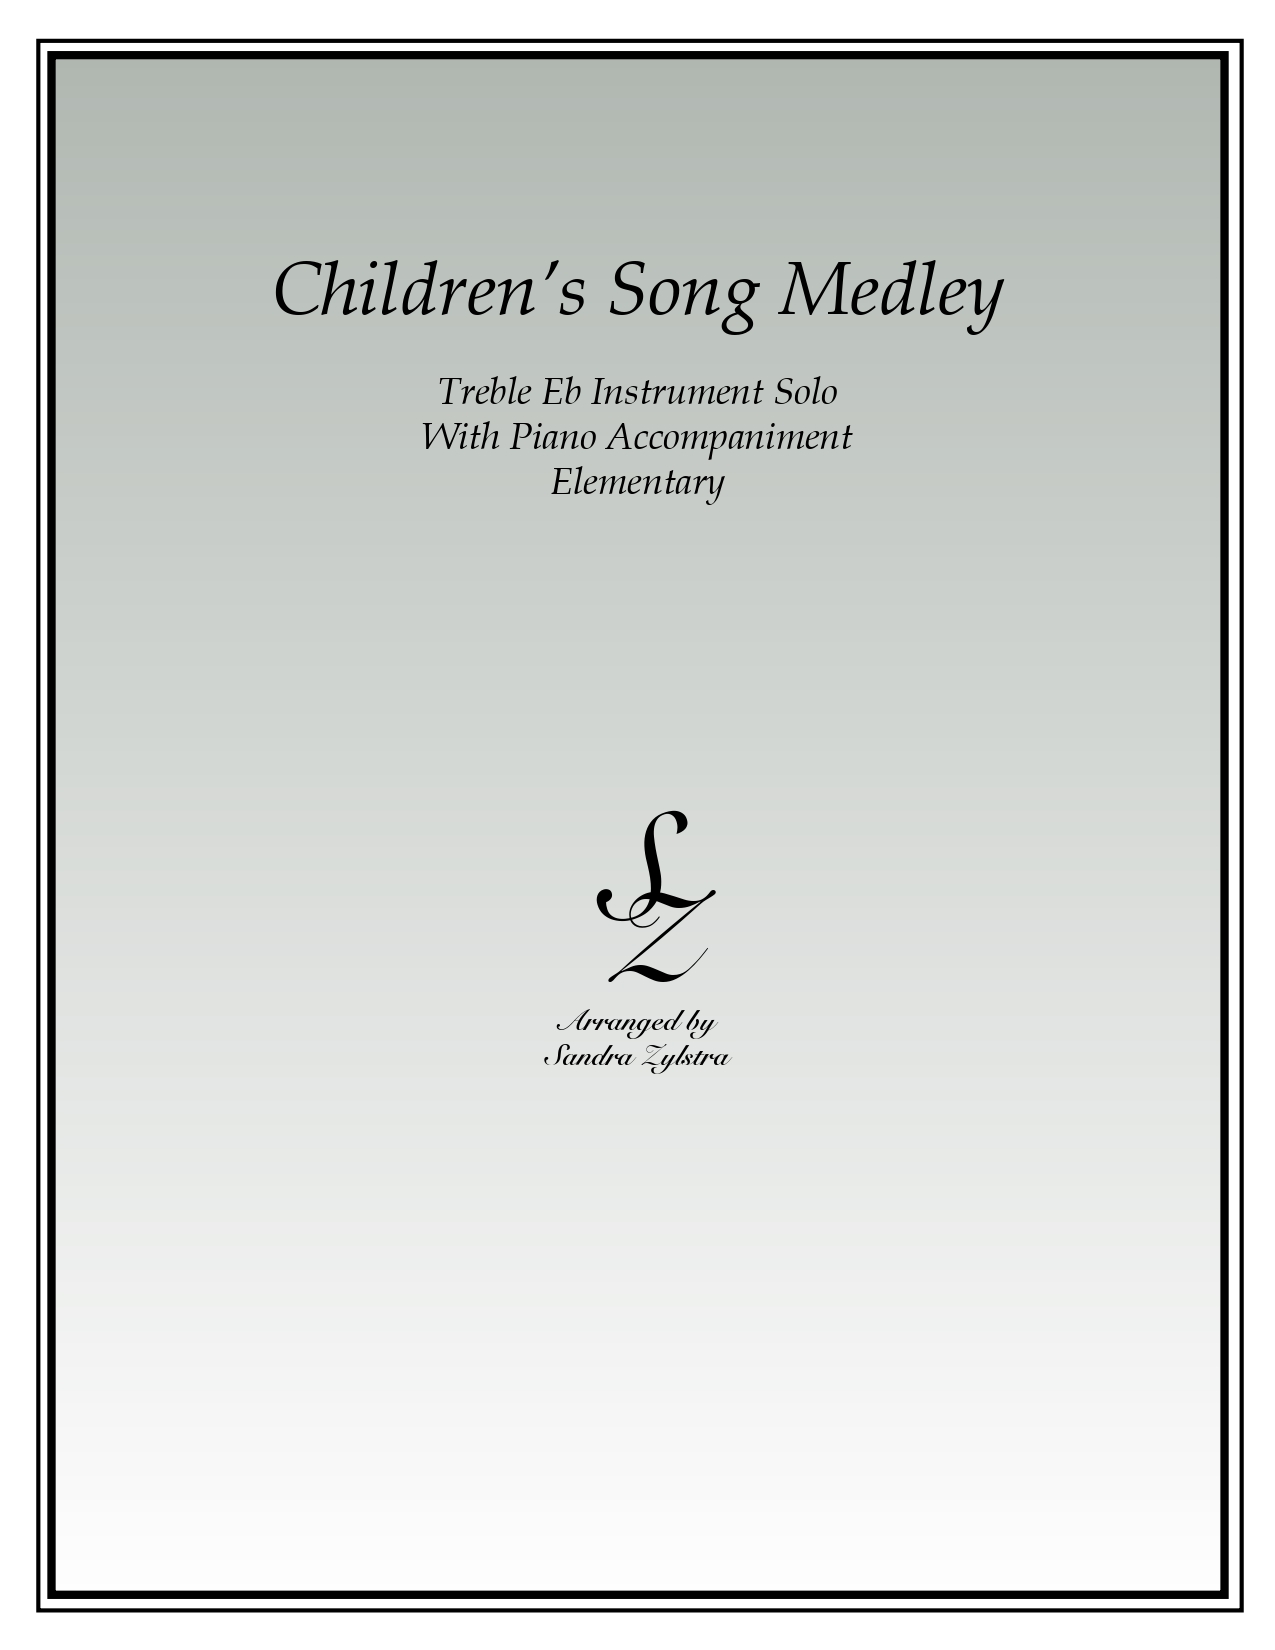 Childrens Song Medley Eb instrument solo part cover page 00011